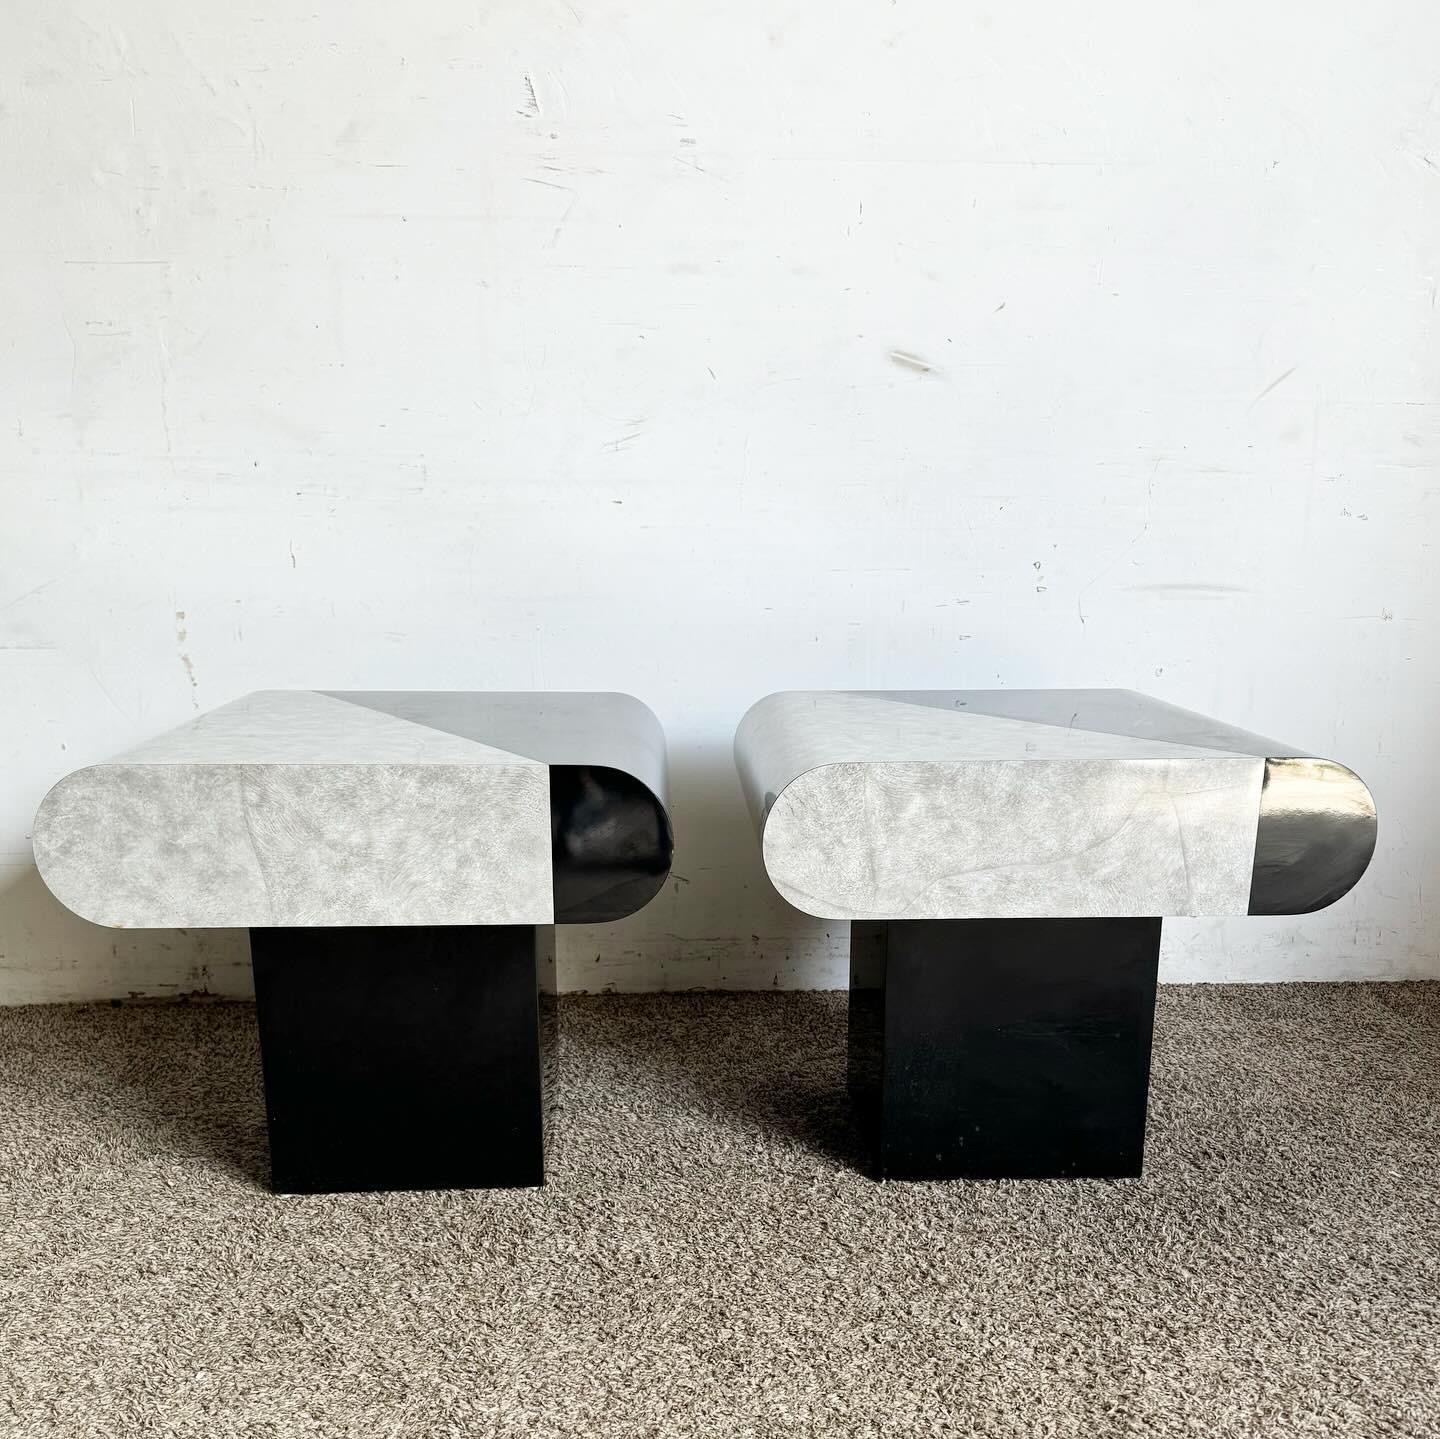 Wood Postmodern Black Gloss and Faux Stone Laminate Bullnose Side Tables - a Pair For Sale